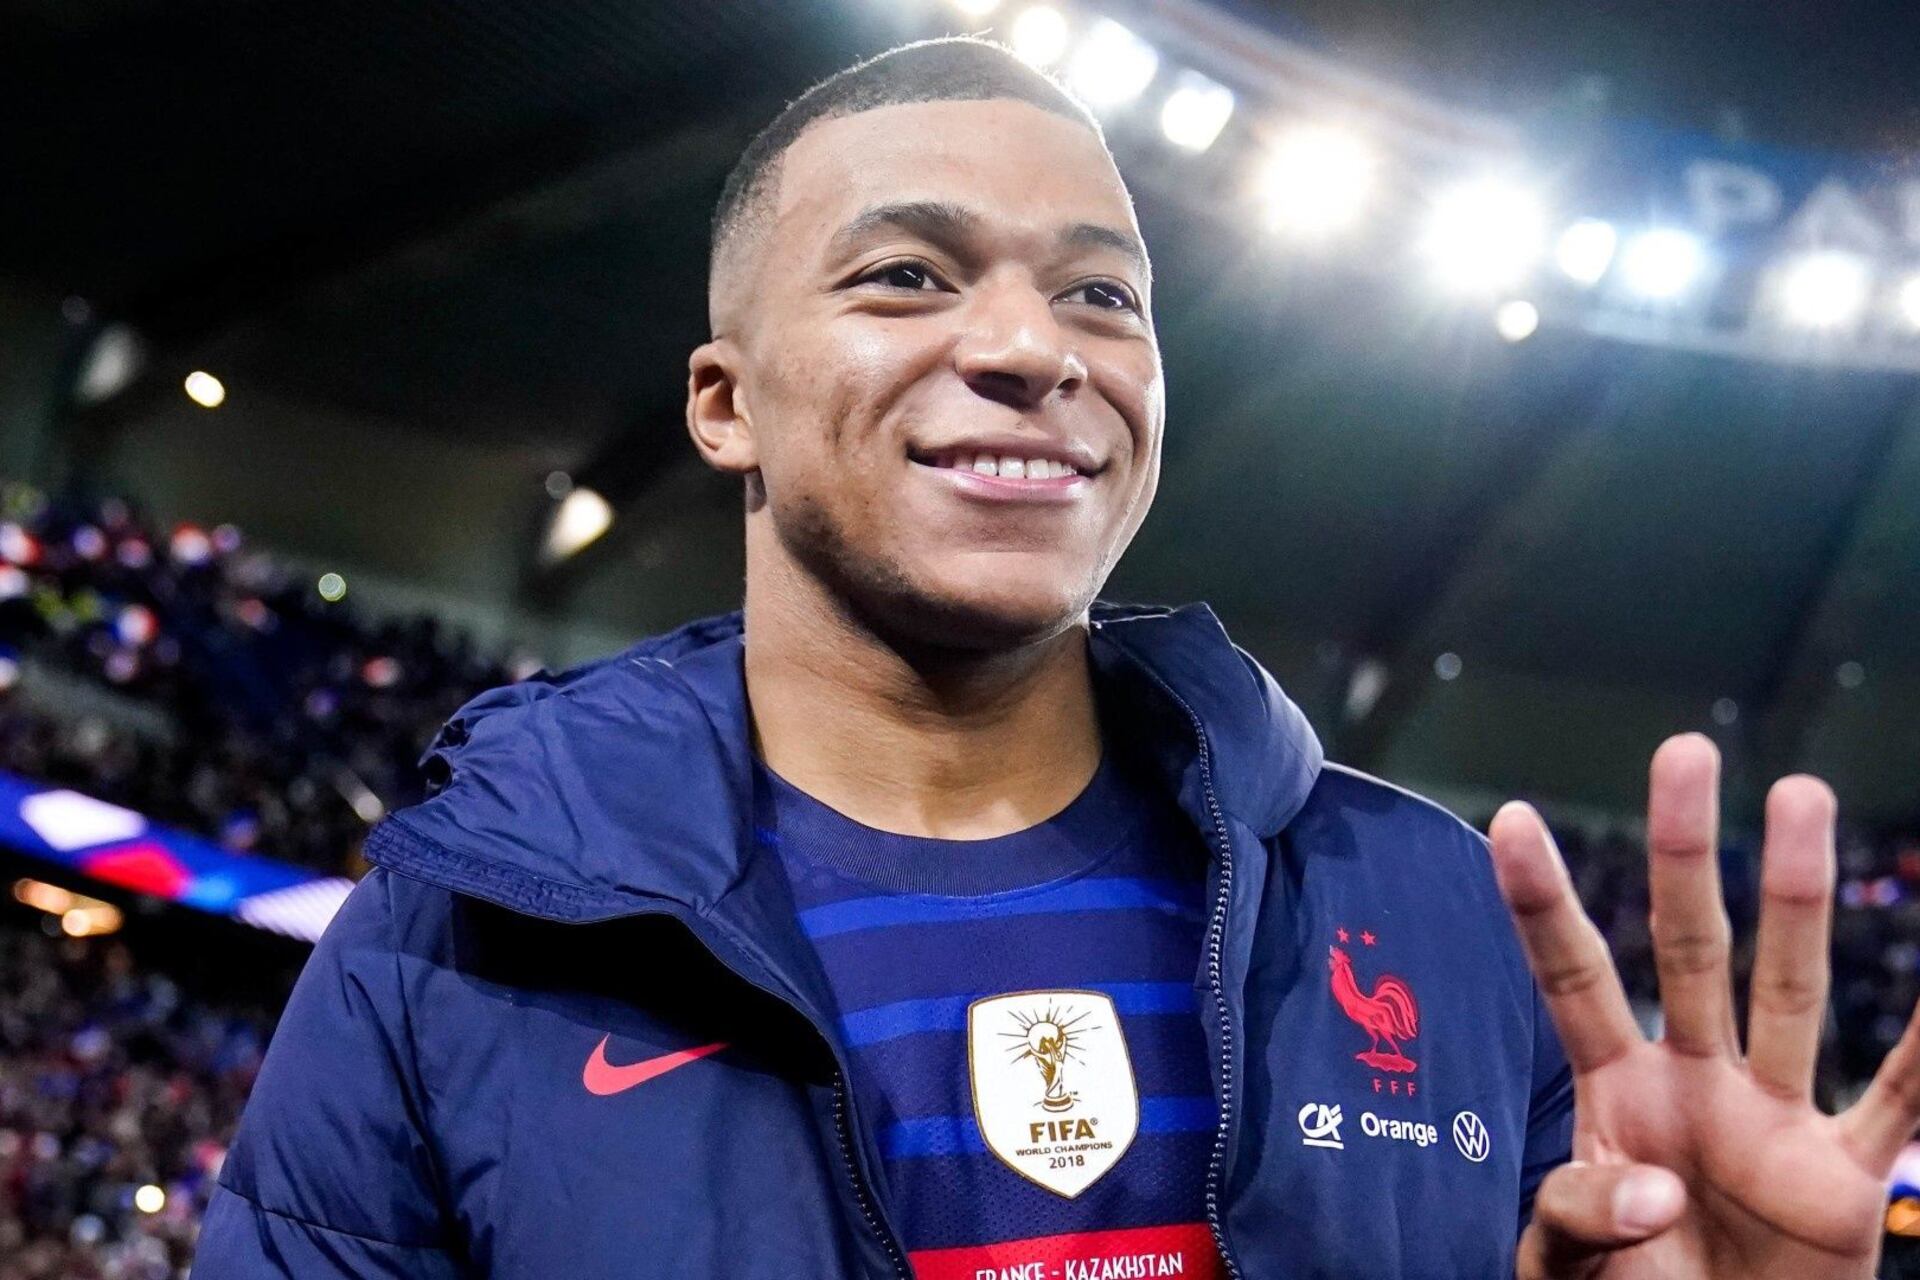 He was a failure in Barcelona and got kicked out, now PSG would sign him as Mbappe's whim